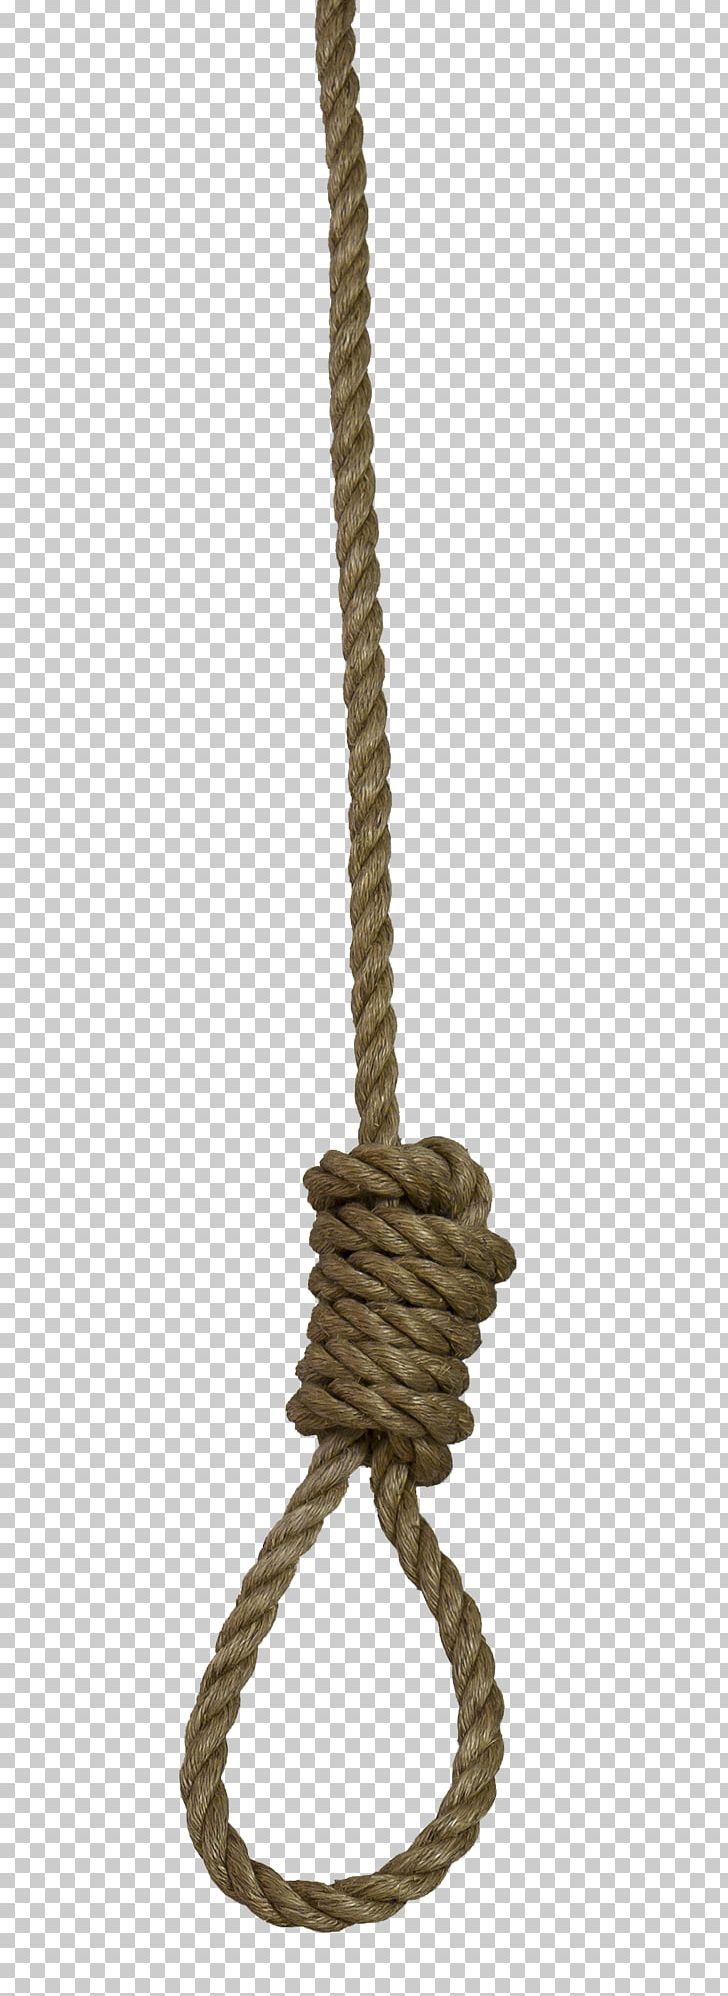 Noose Rope Knot PNG, Clipart, Cartoon Rope, Electrical Cable, Free, Free Stock Png, Hanging Free PNG Download